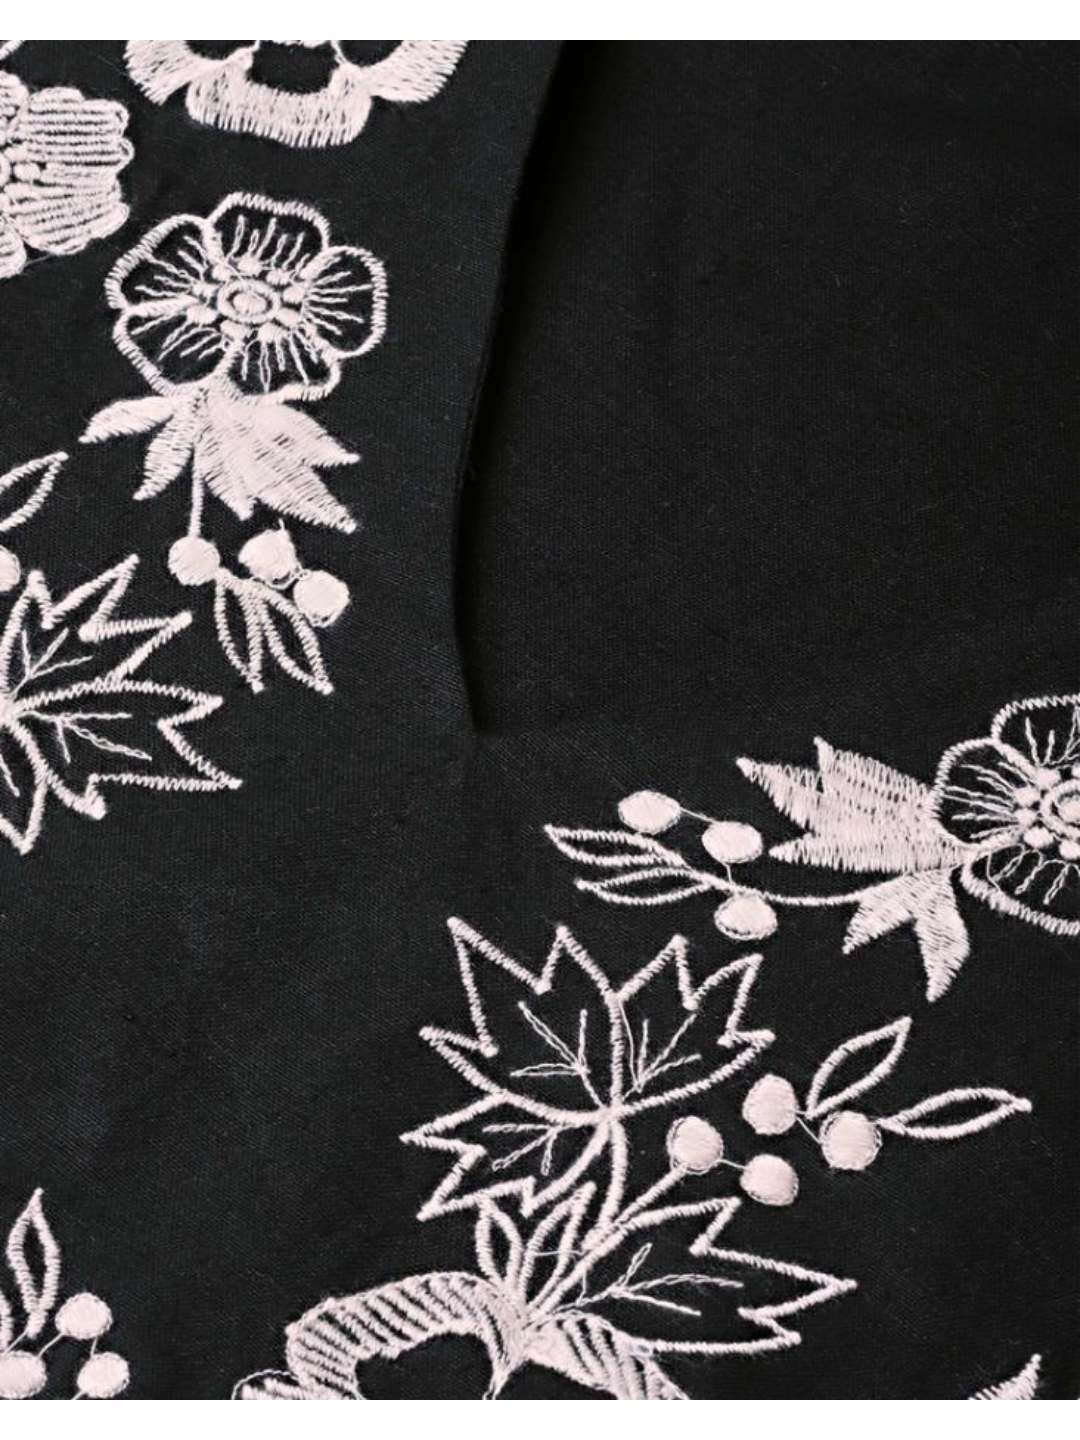 Embroidered Cotton Black Dress